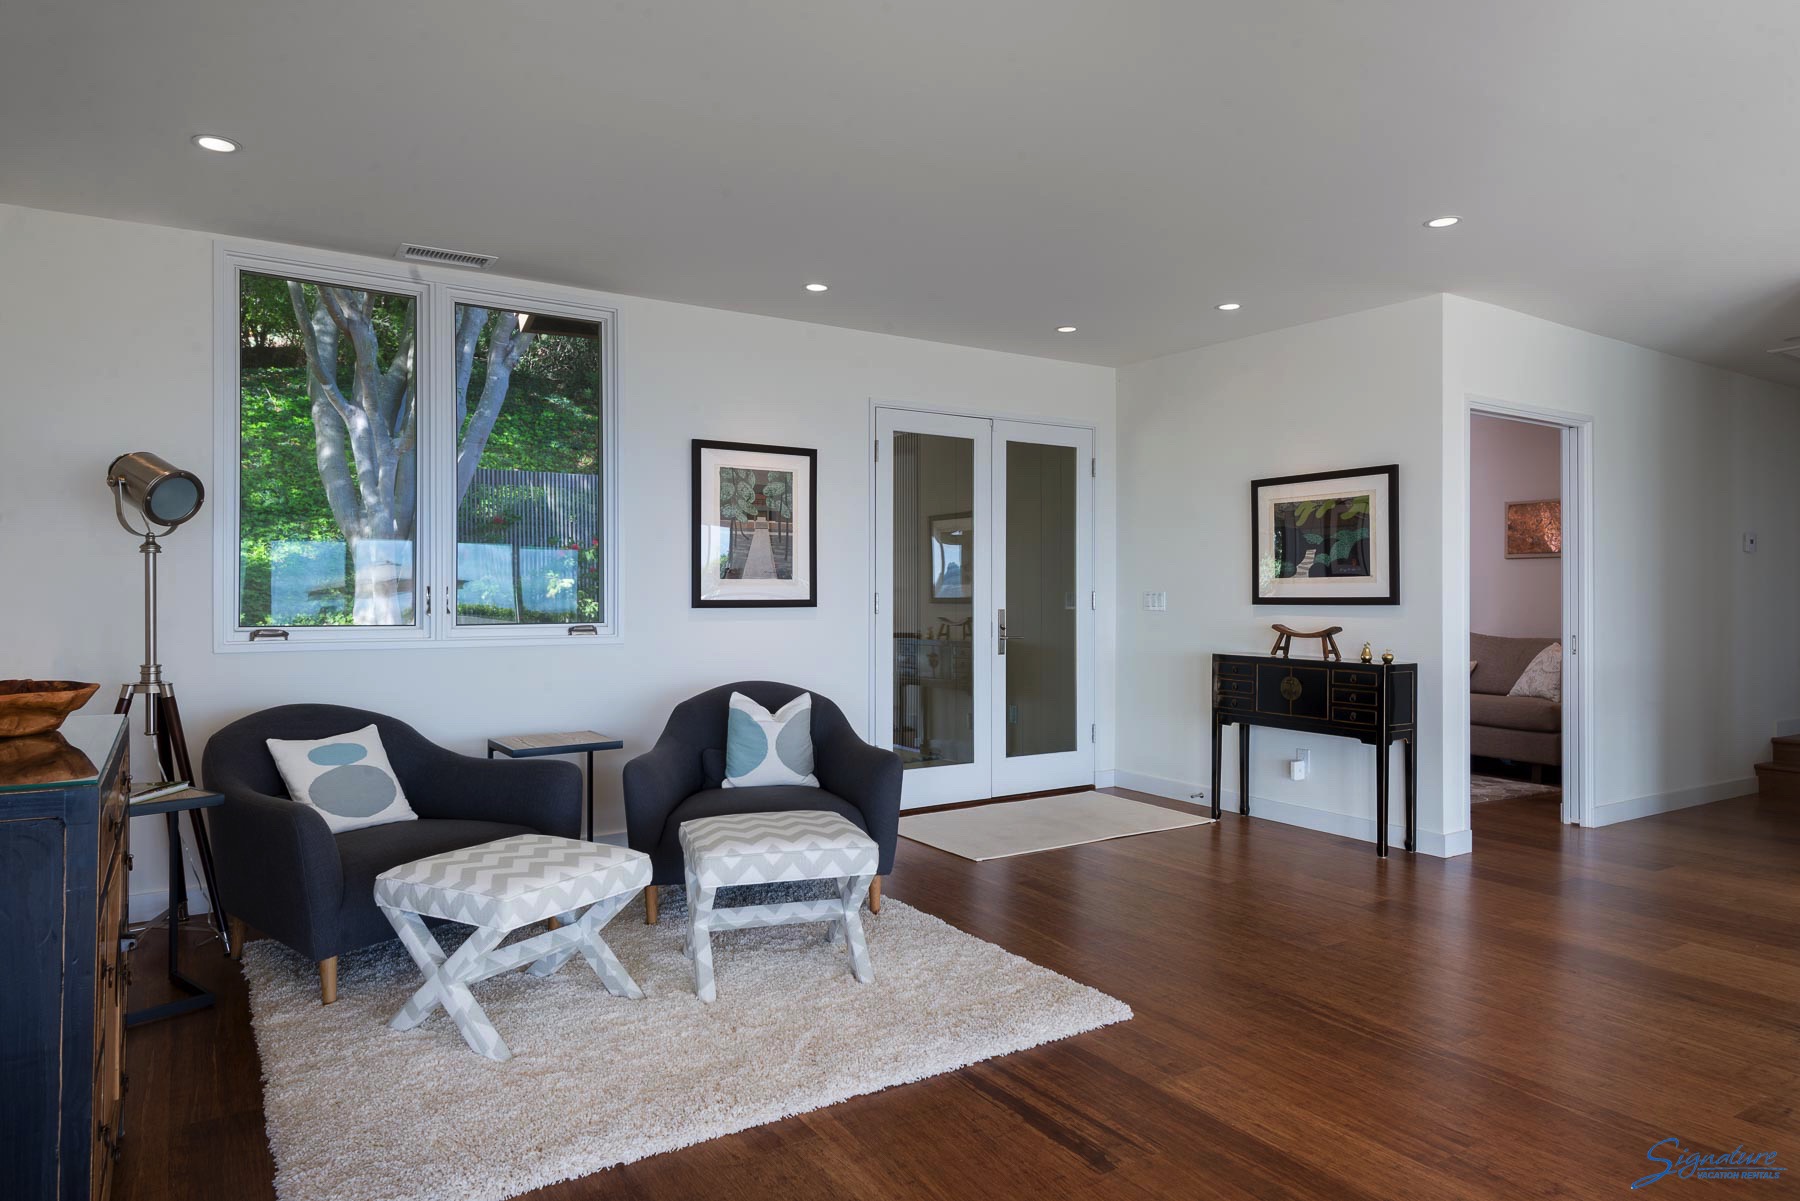 Beautiful wood floors throughout the home. This is a sitting area at the front entrance.